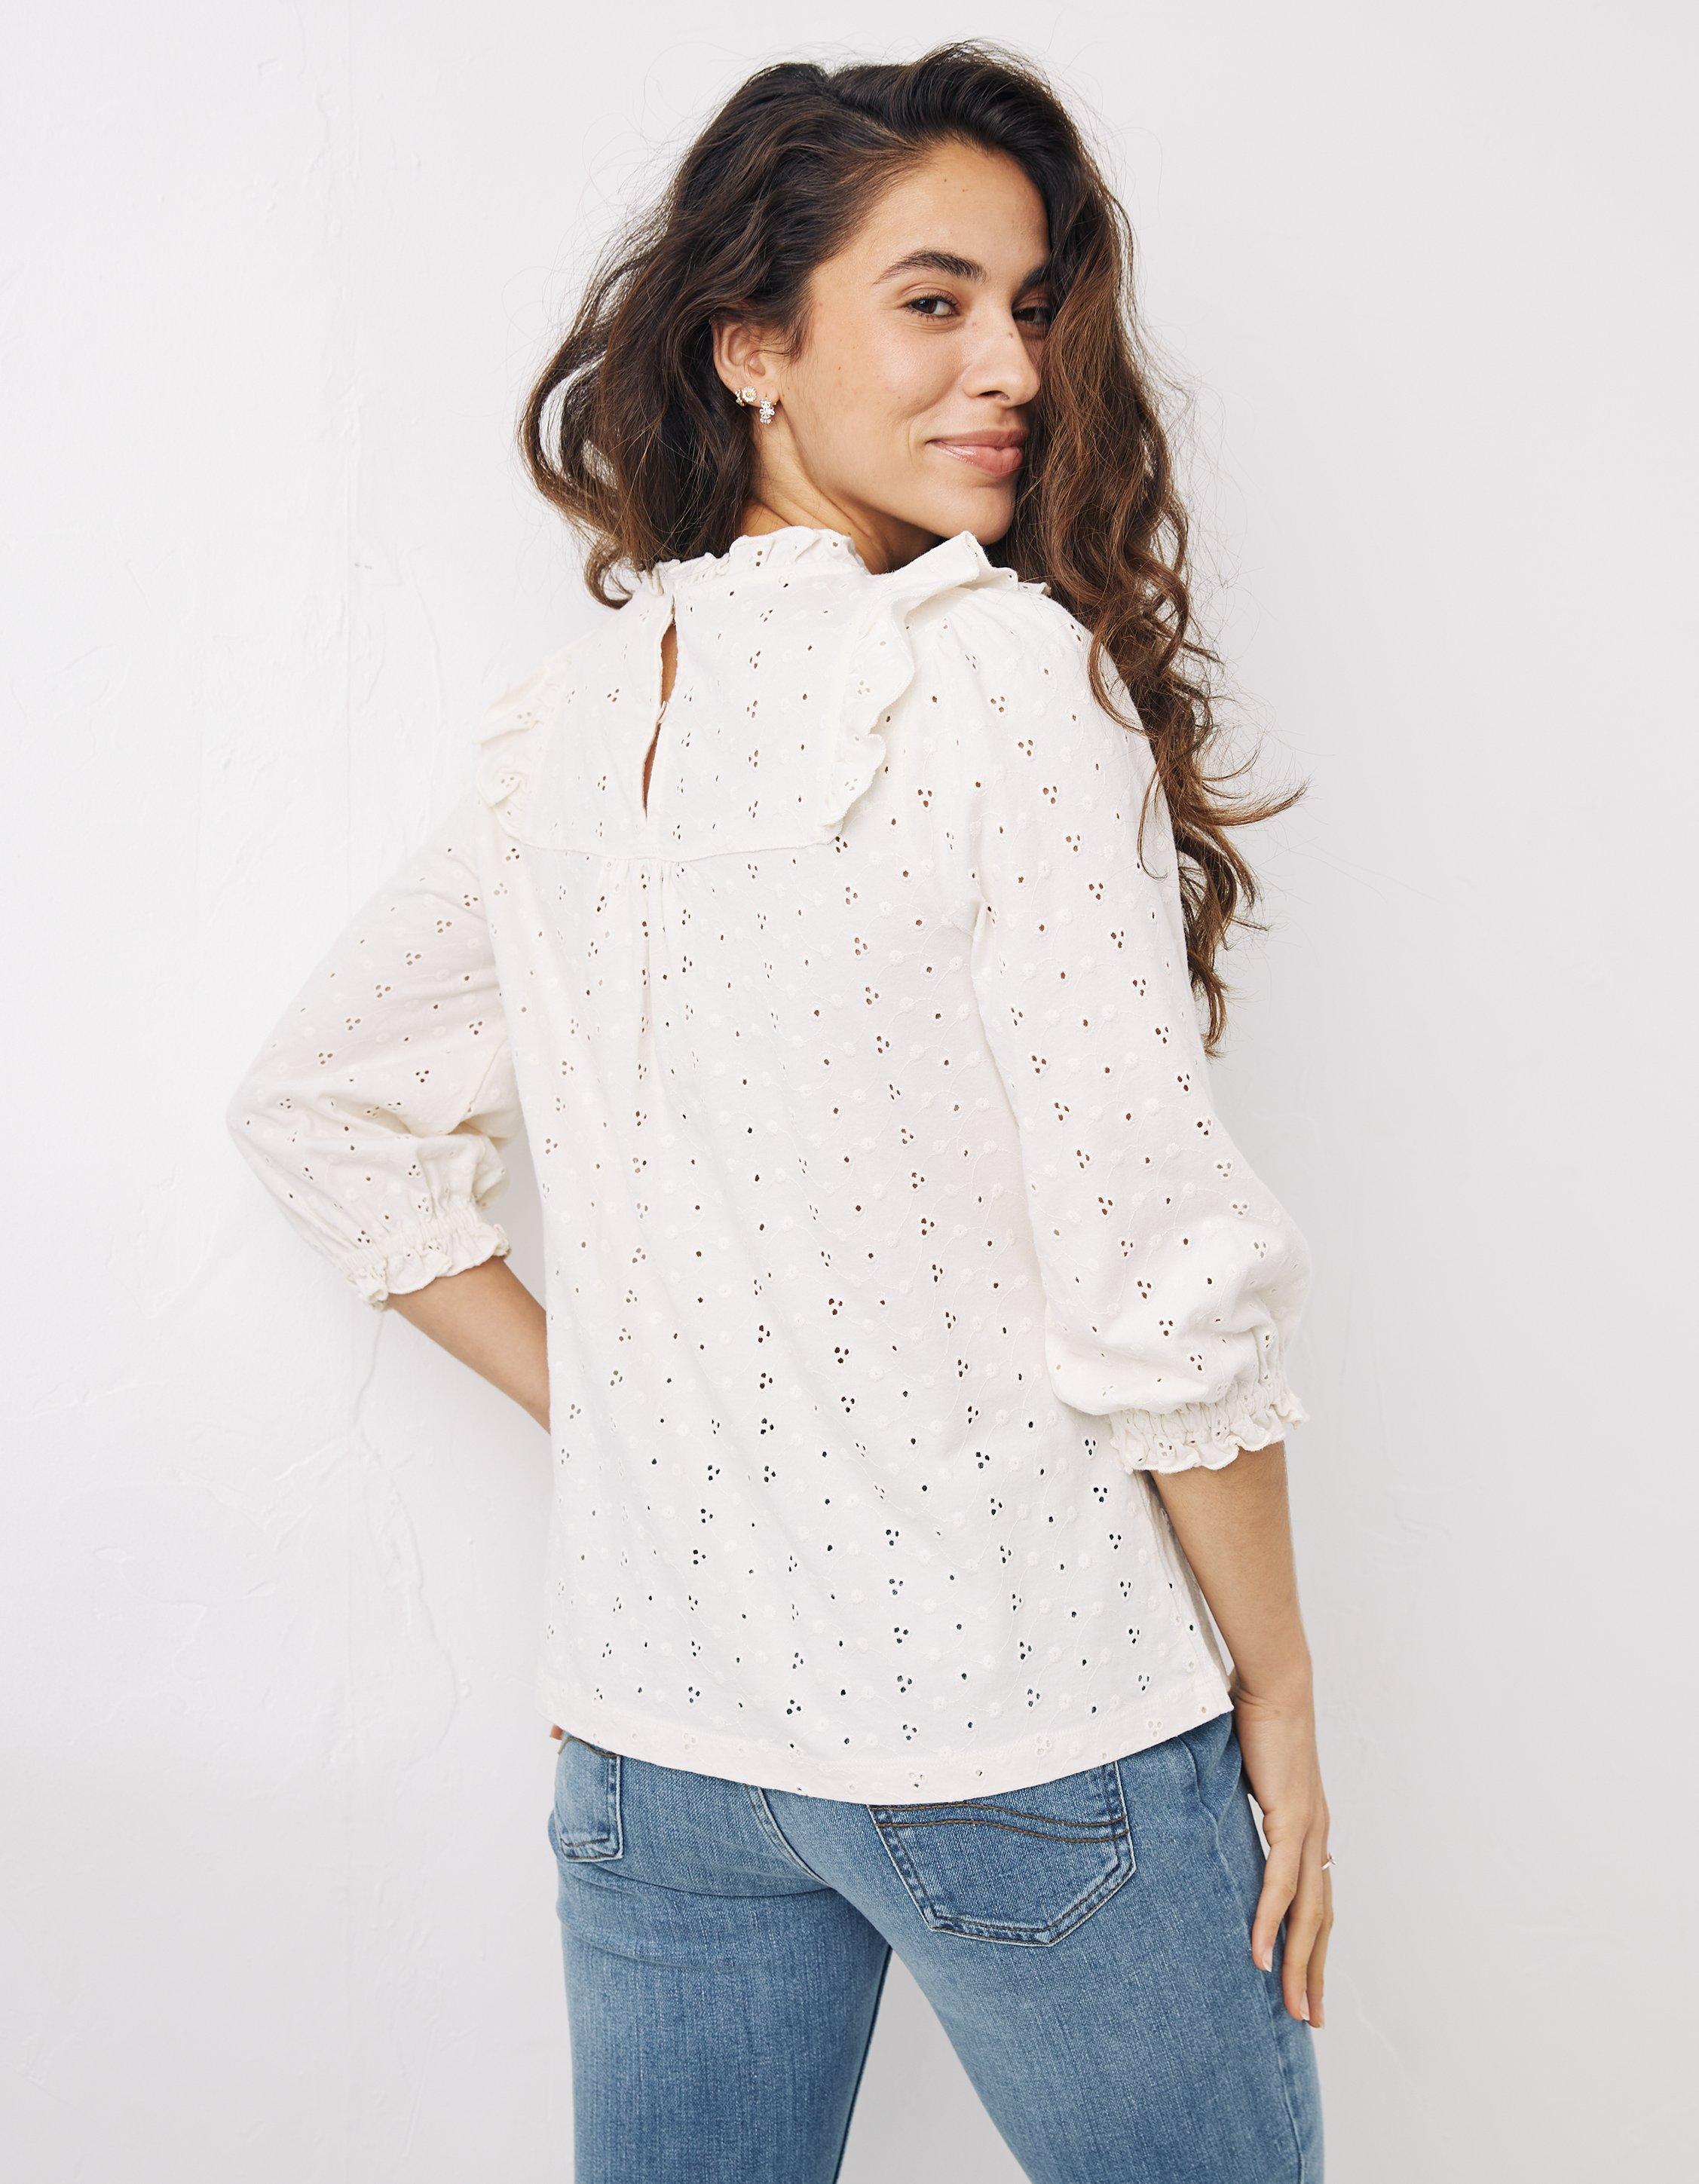 Soft White, Cotton Broderie Blouse